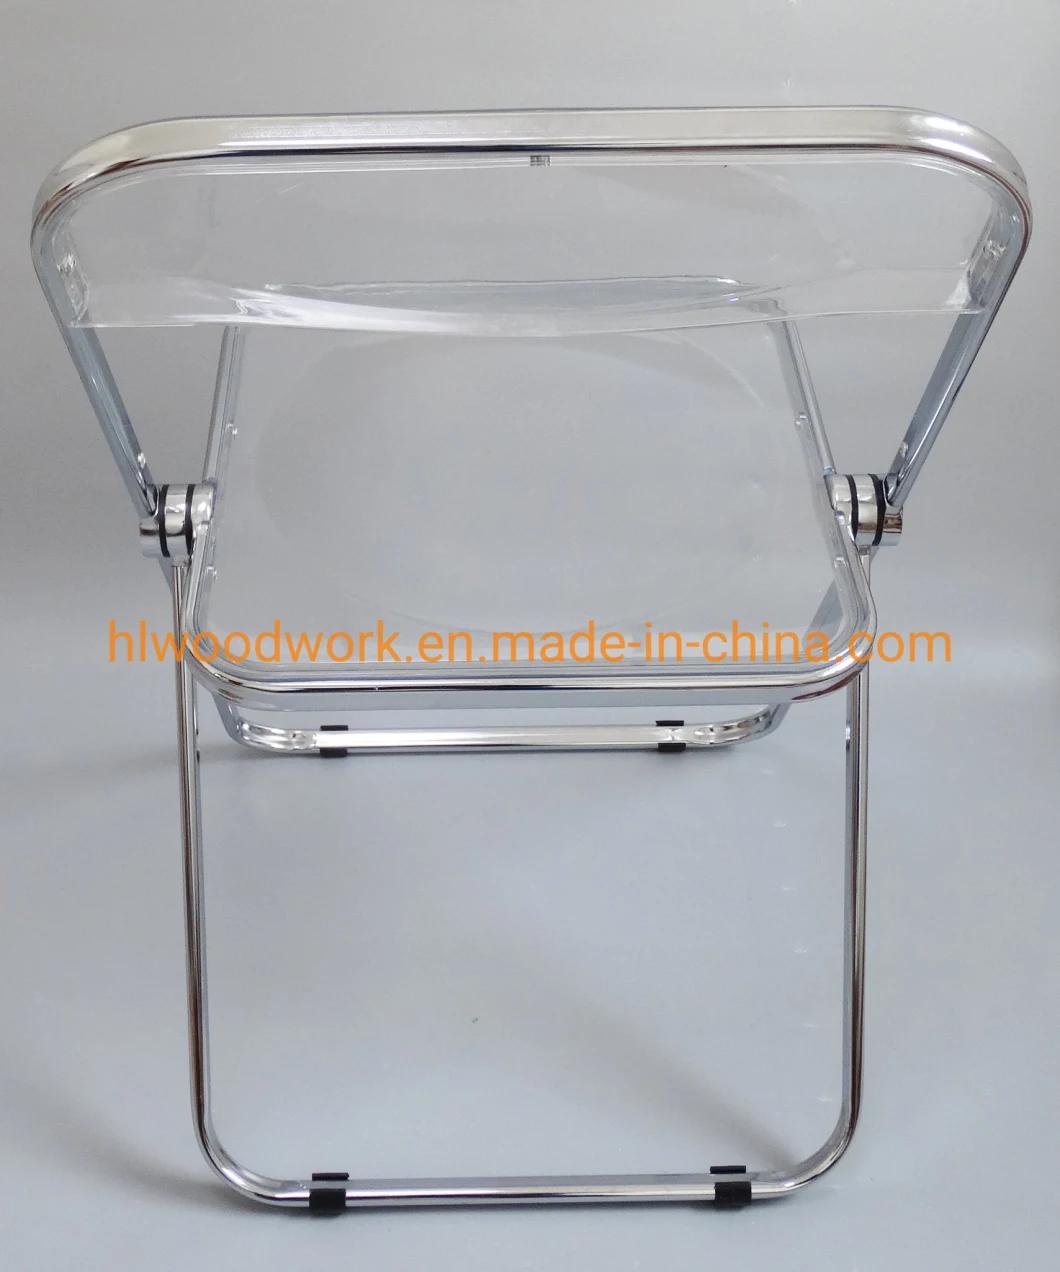 Modern Transparent Red Folding Chair PC Plastic Hotel Chairt Chrome Frame Office Bar Dining Leisure Banquet Wedding Meeting Chair Plastic Dining Chair